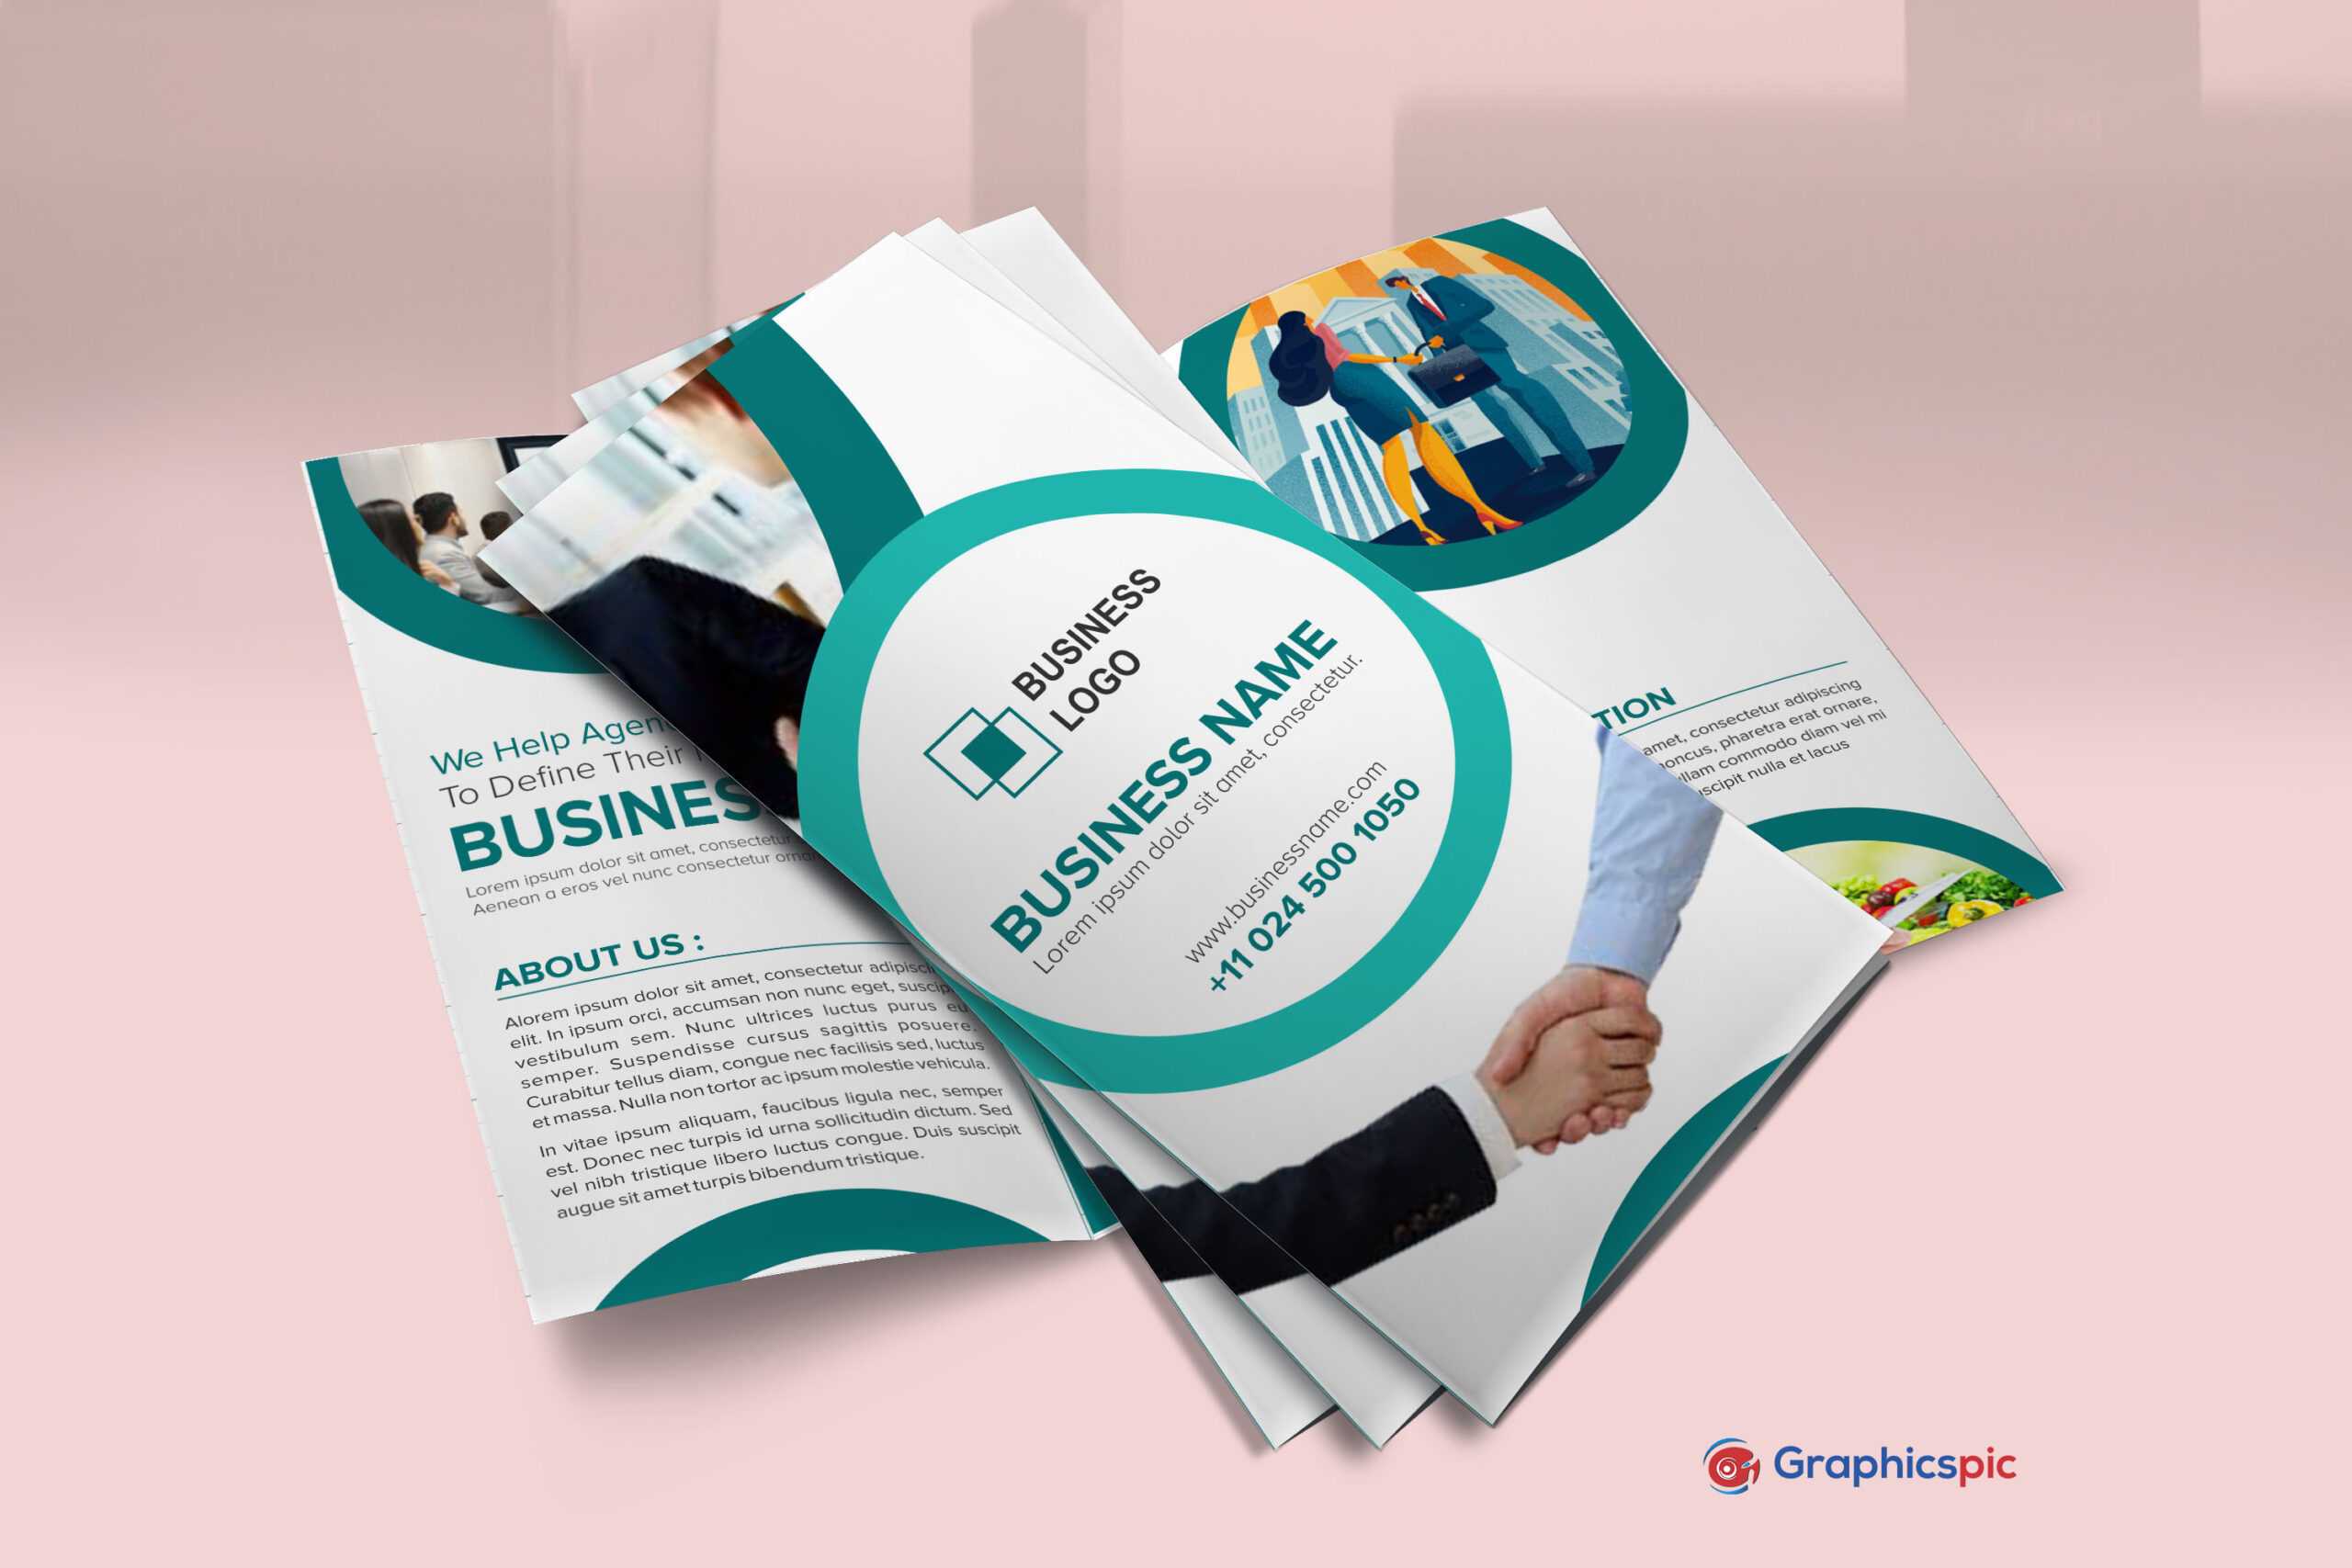 Free Download Brochure Templates Design For Events, Products Intended For Product Brochure Template Free